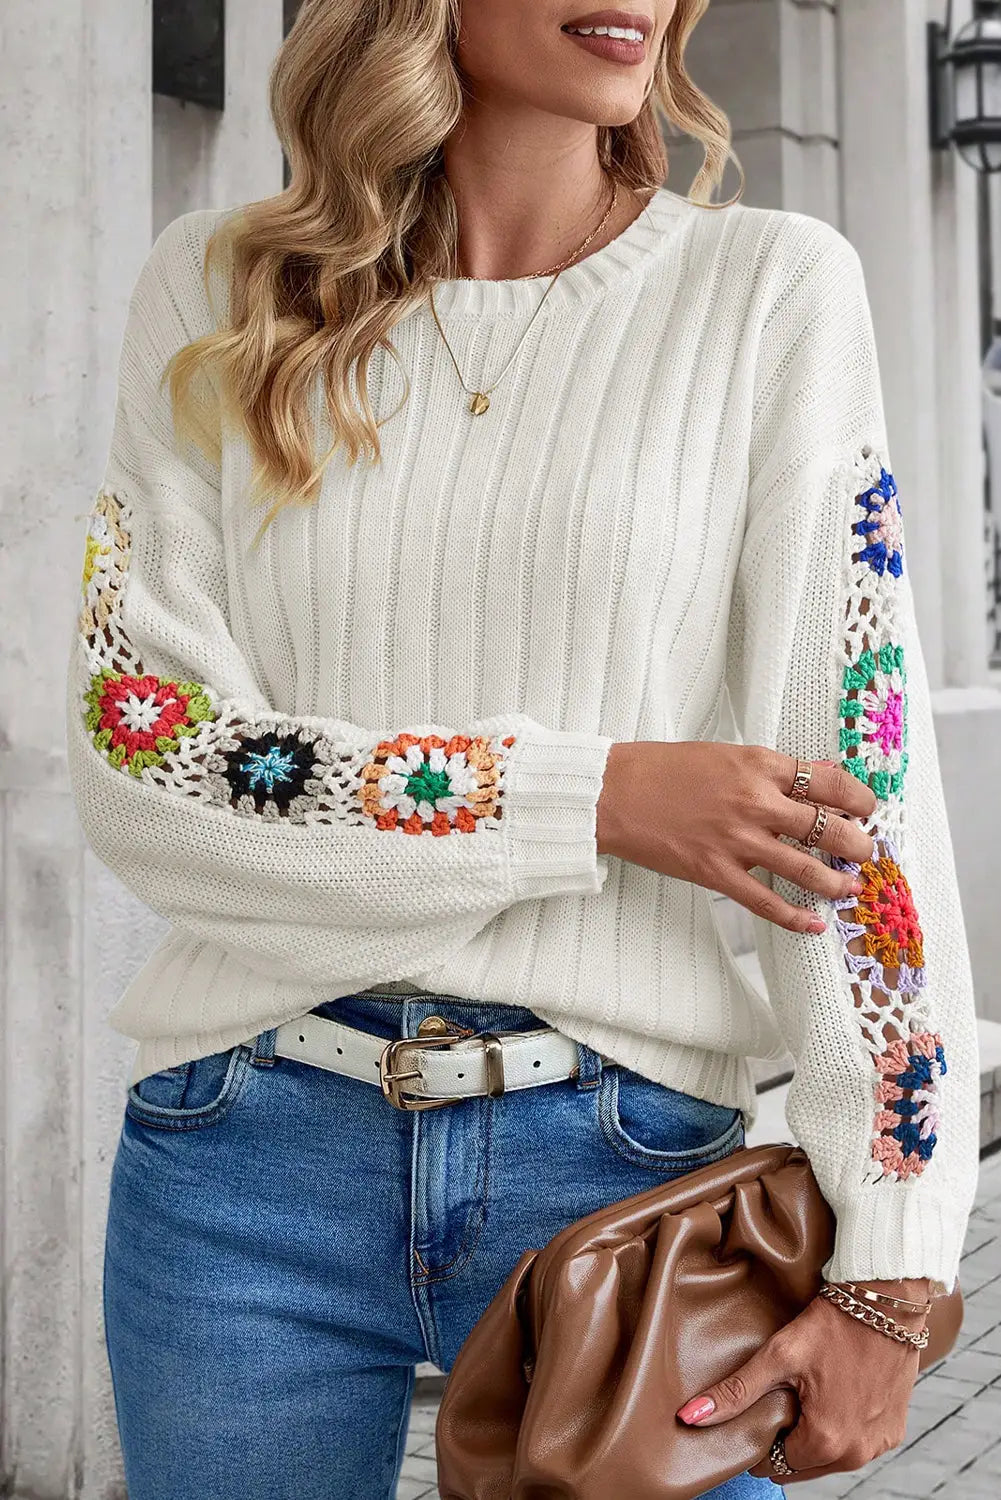 White floral crochet sleeve ribbed knit sweater - l / 55% acrylic + 45% cotton - sweaters & cardigans